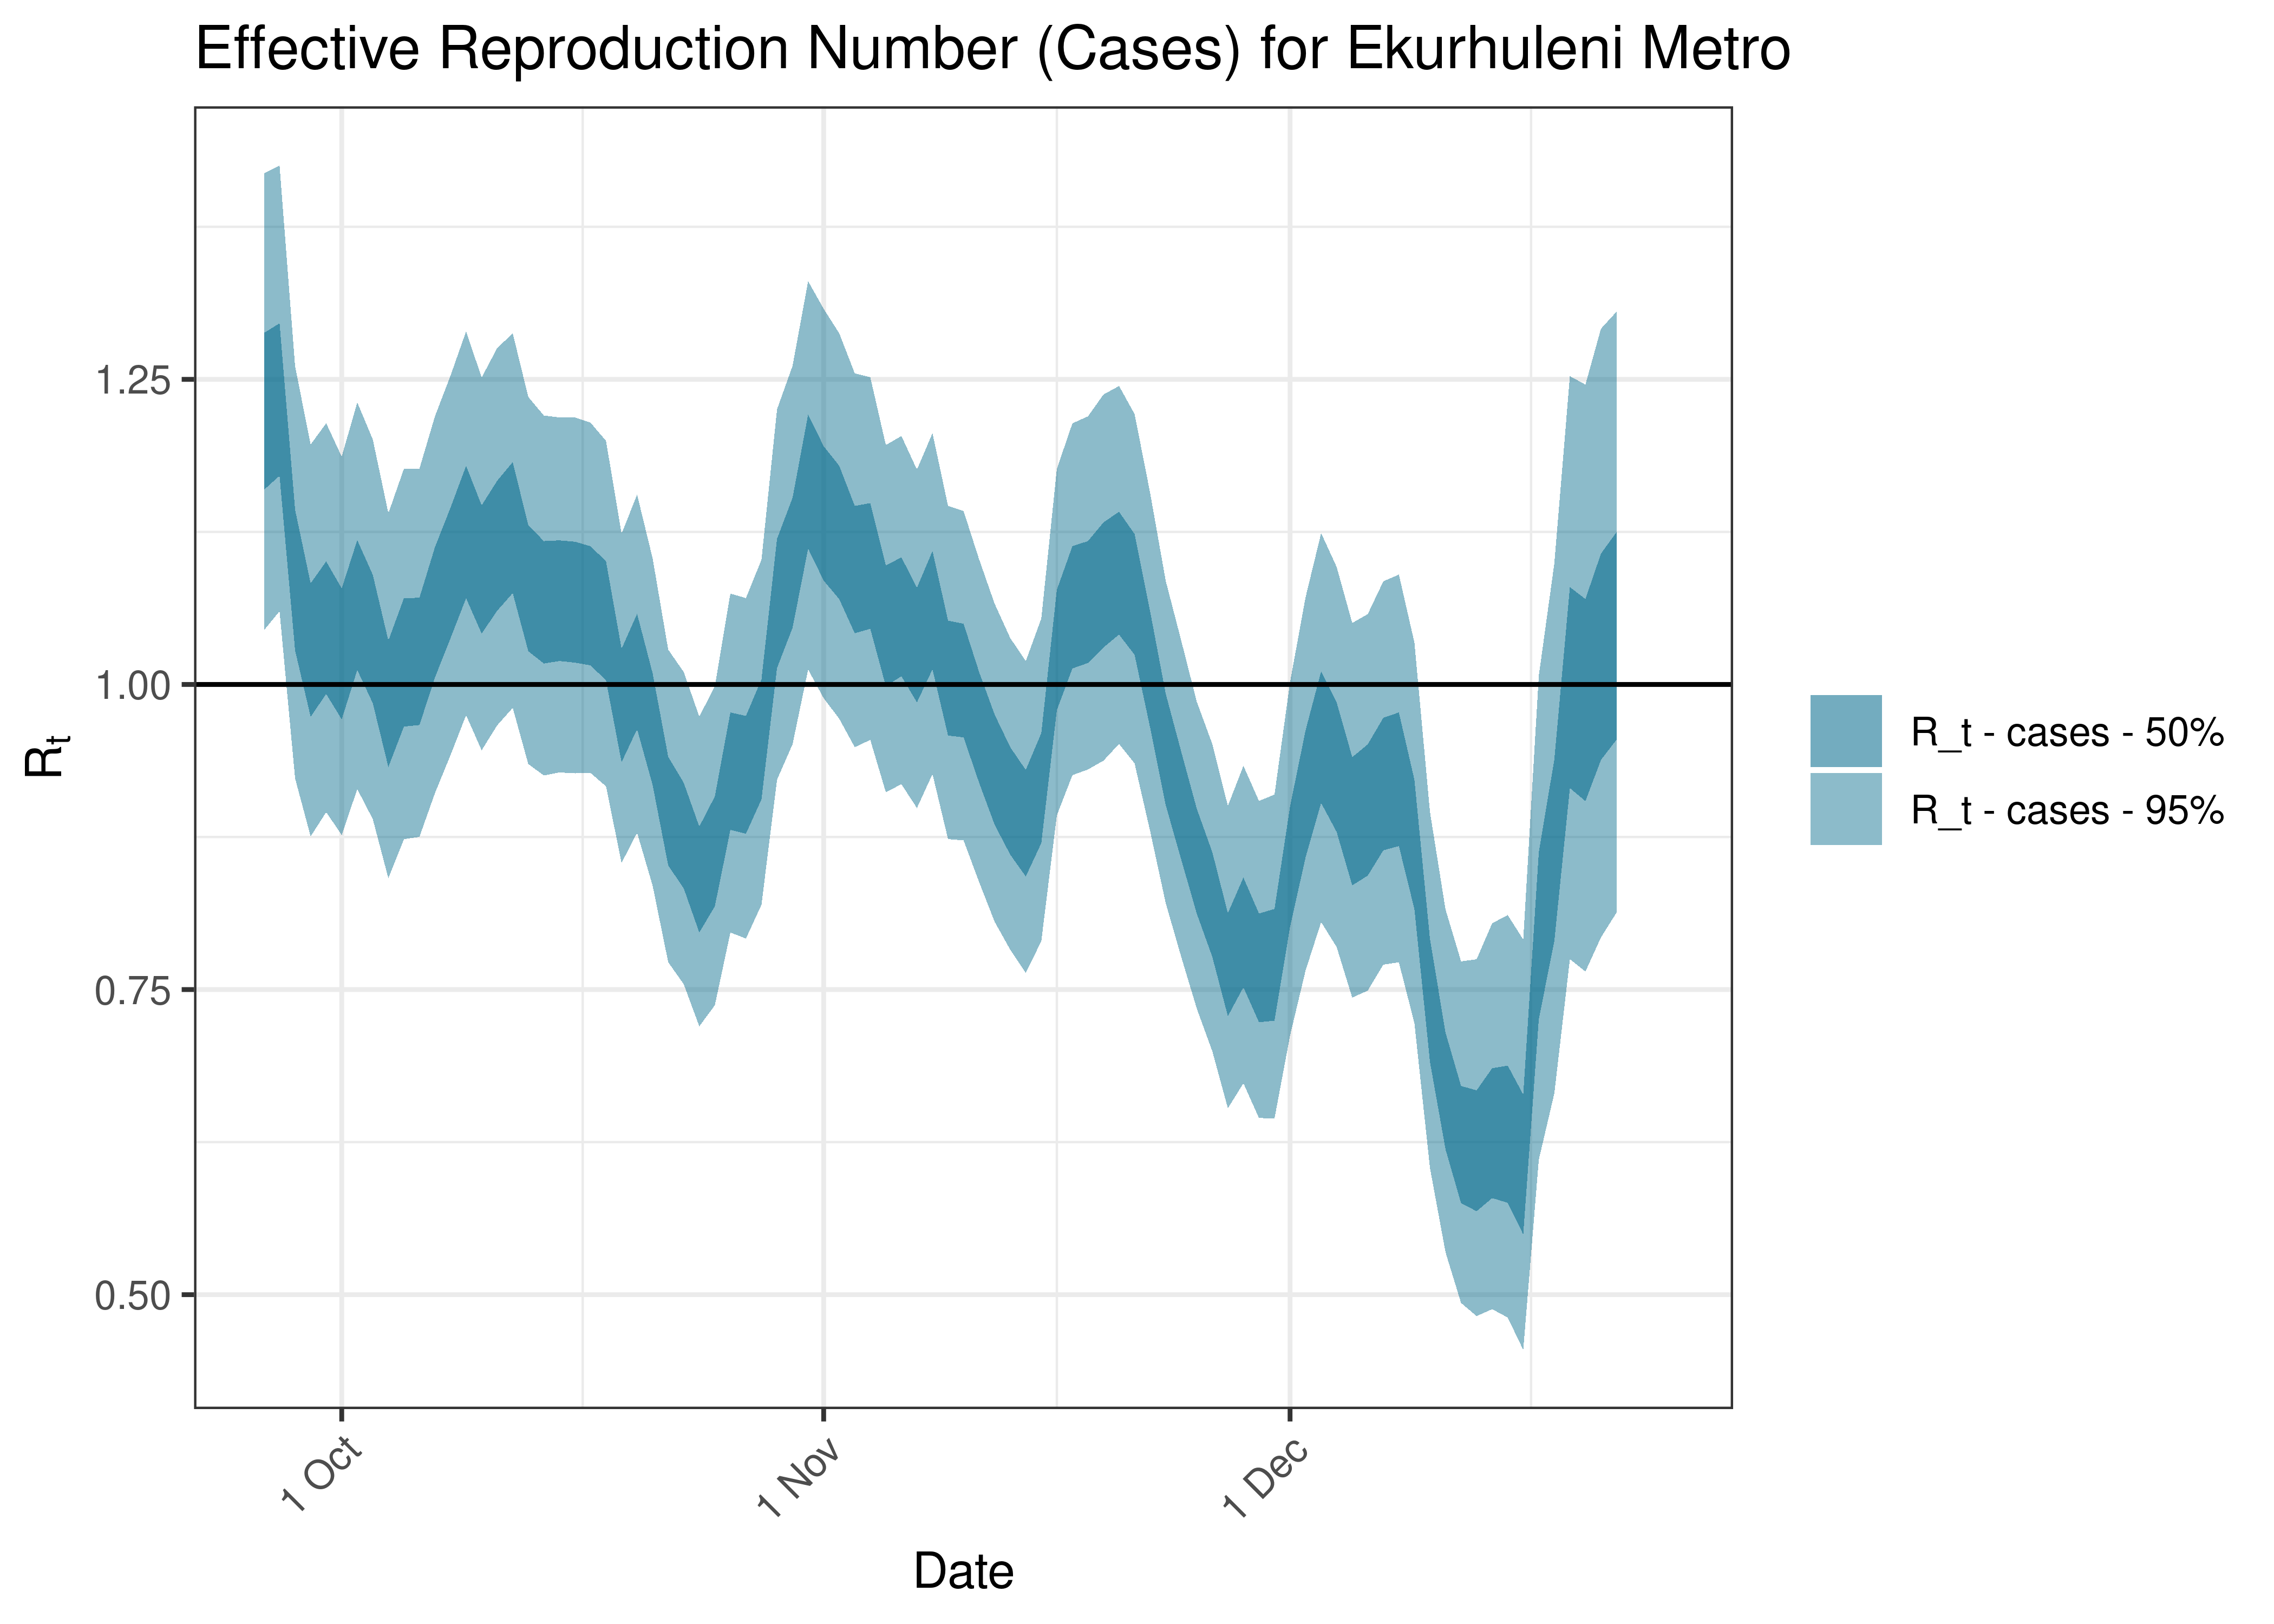 Estimated Effective Reproduction Number Based on Cases for Ekurhuleni Metro over last 90 days